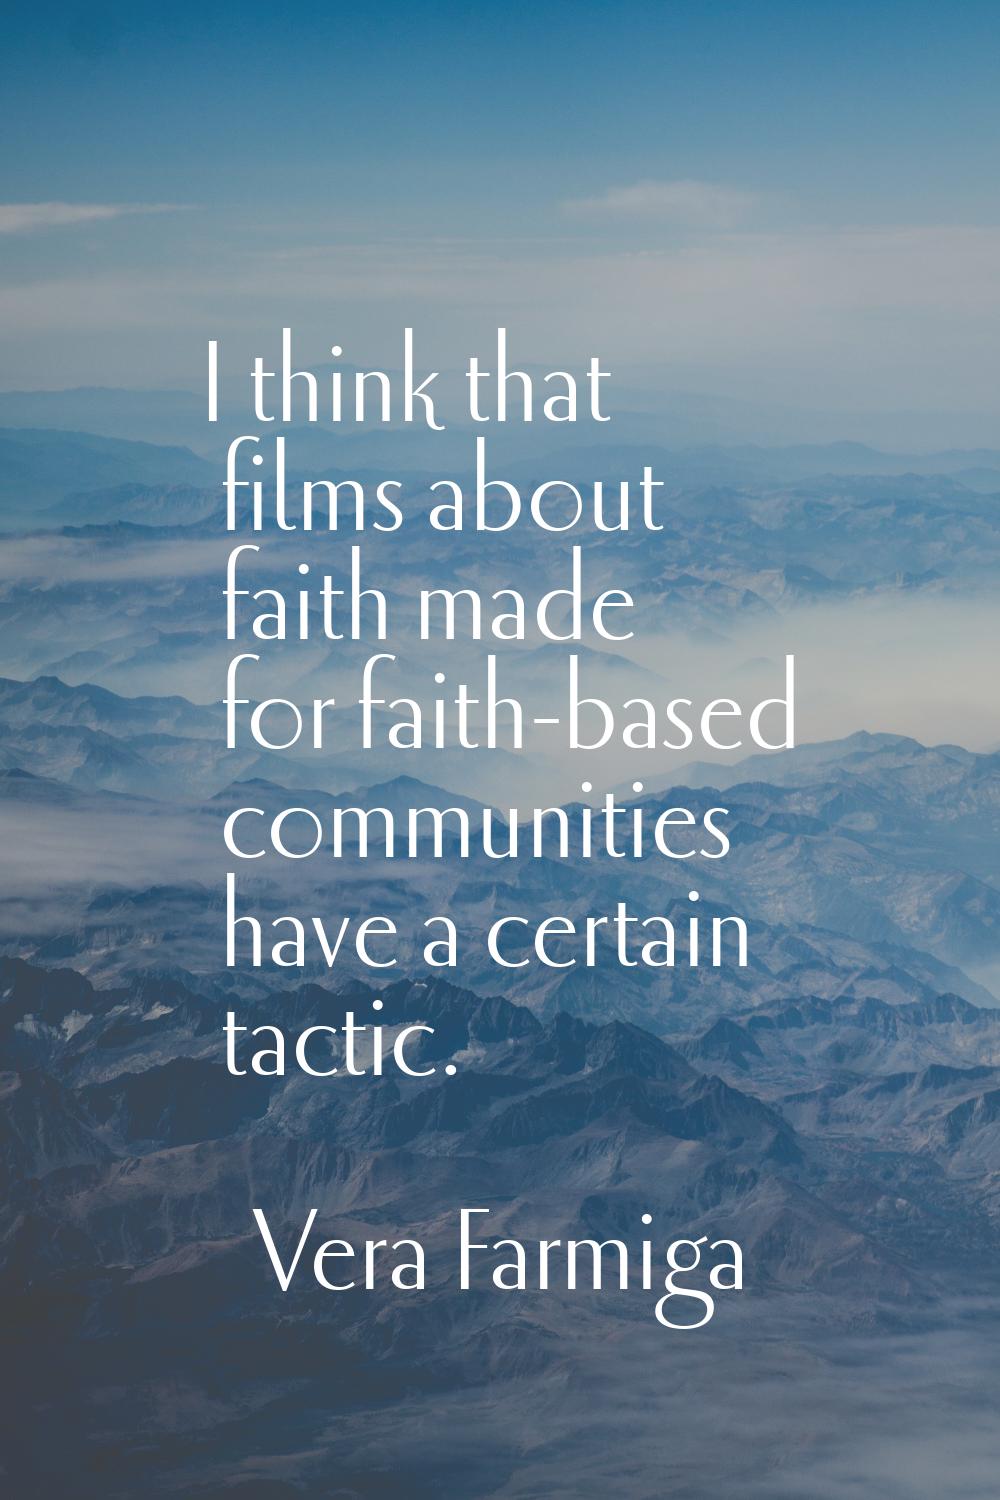 I think that films about faith made for faith-based communities have a certain tactic.